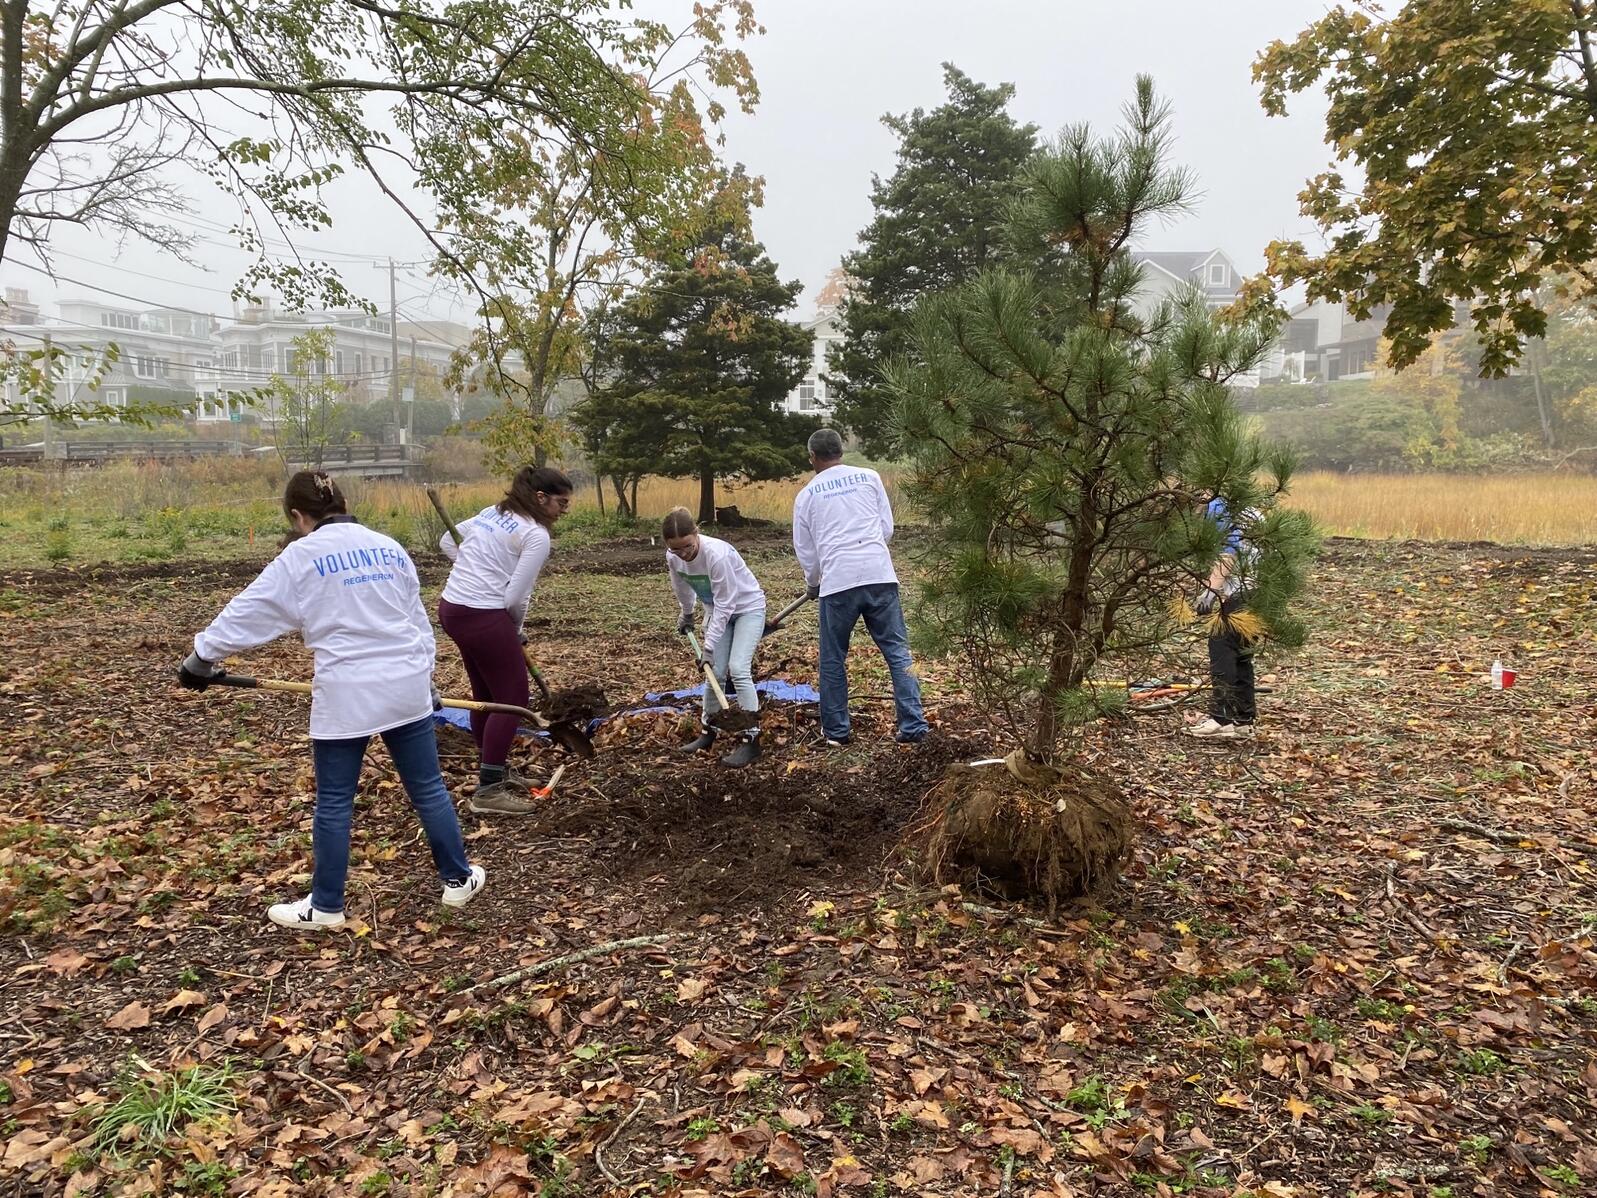 A group of volunteers helps dig a hole into which a native tree is being planted